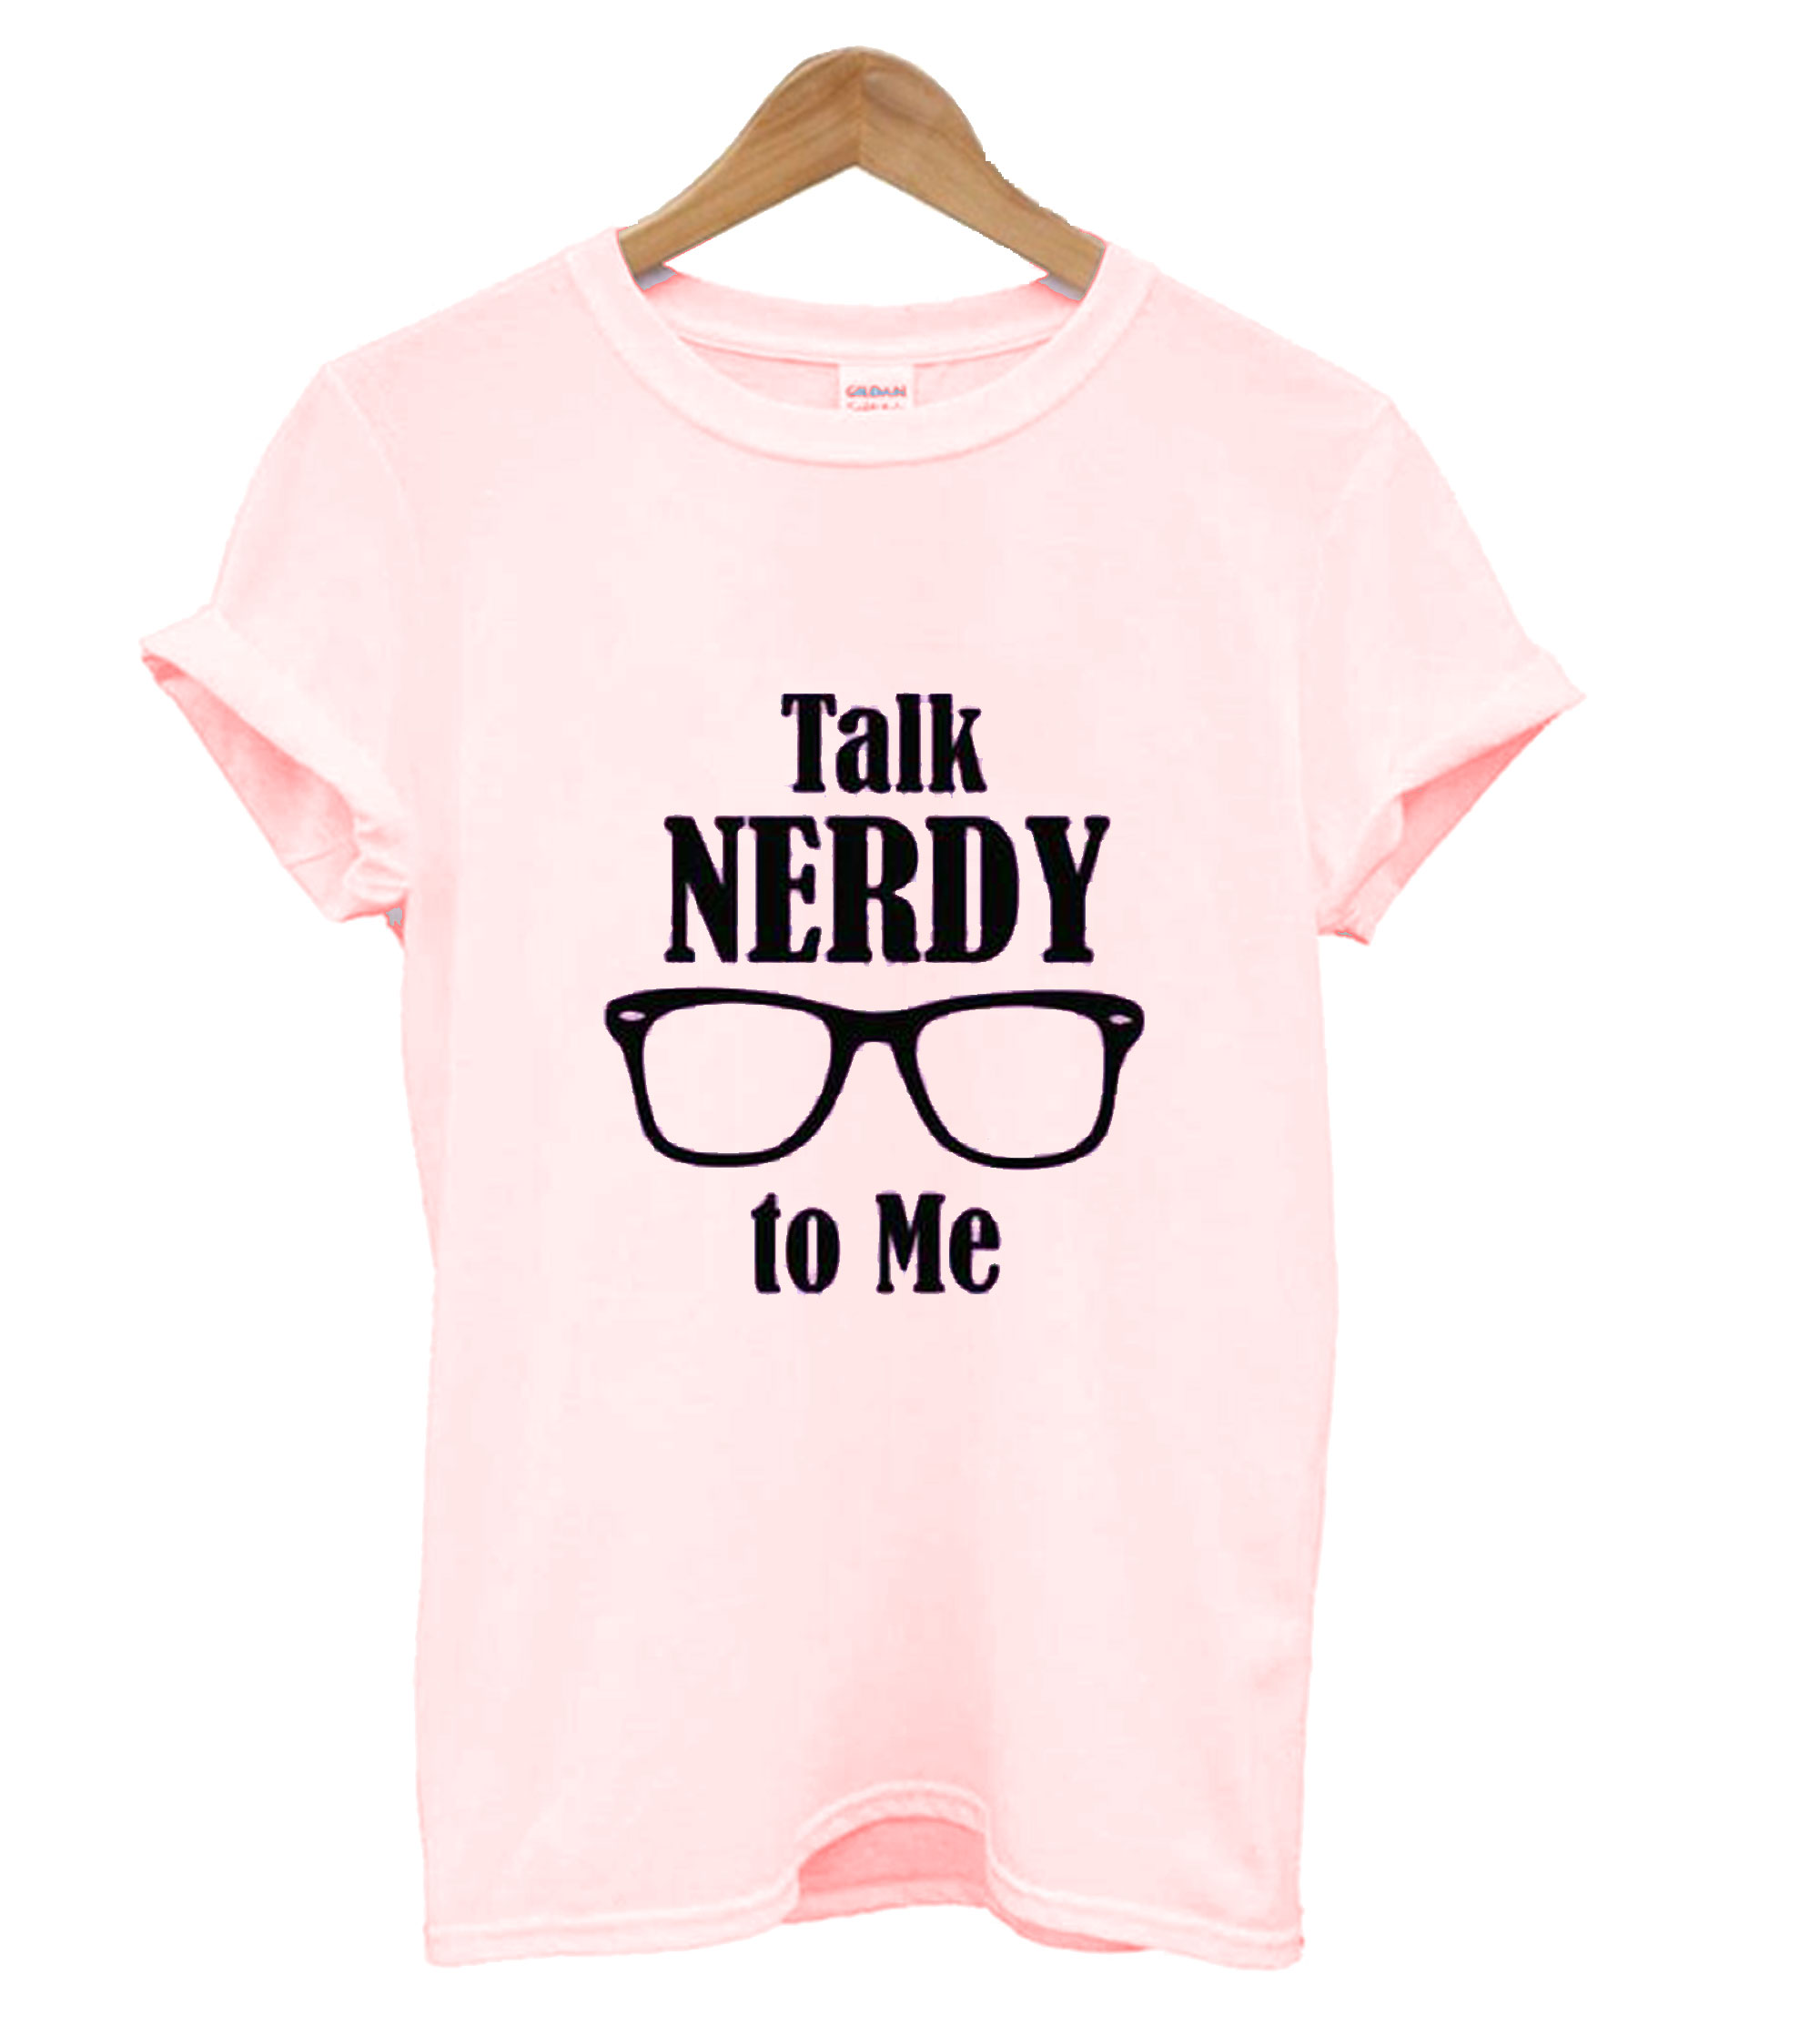 Talk Nerdy To Me T Shirt Which Is Created Following Today's Trends